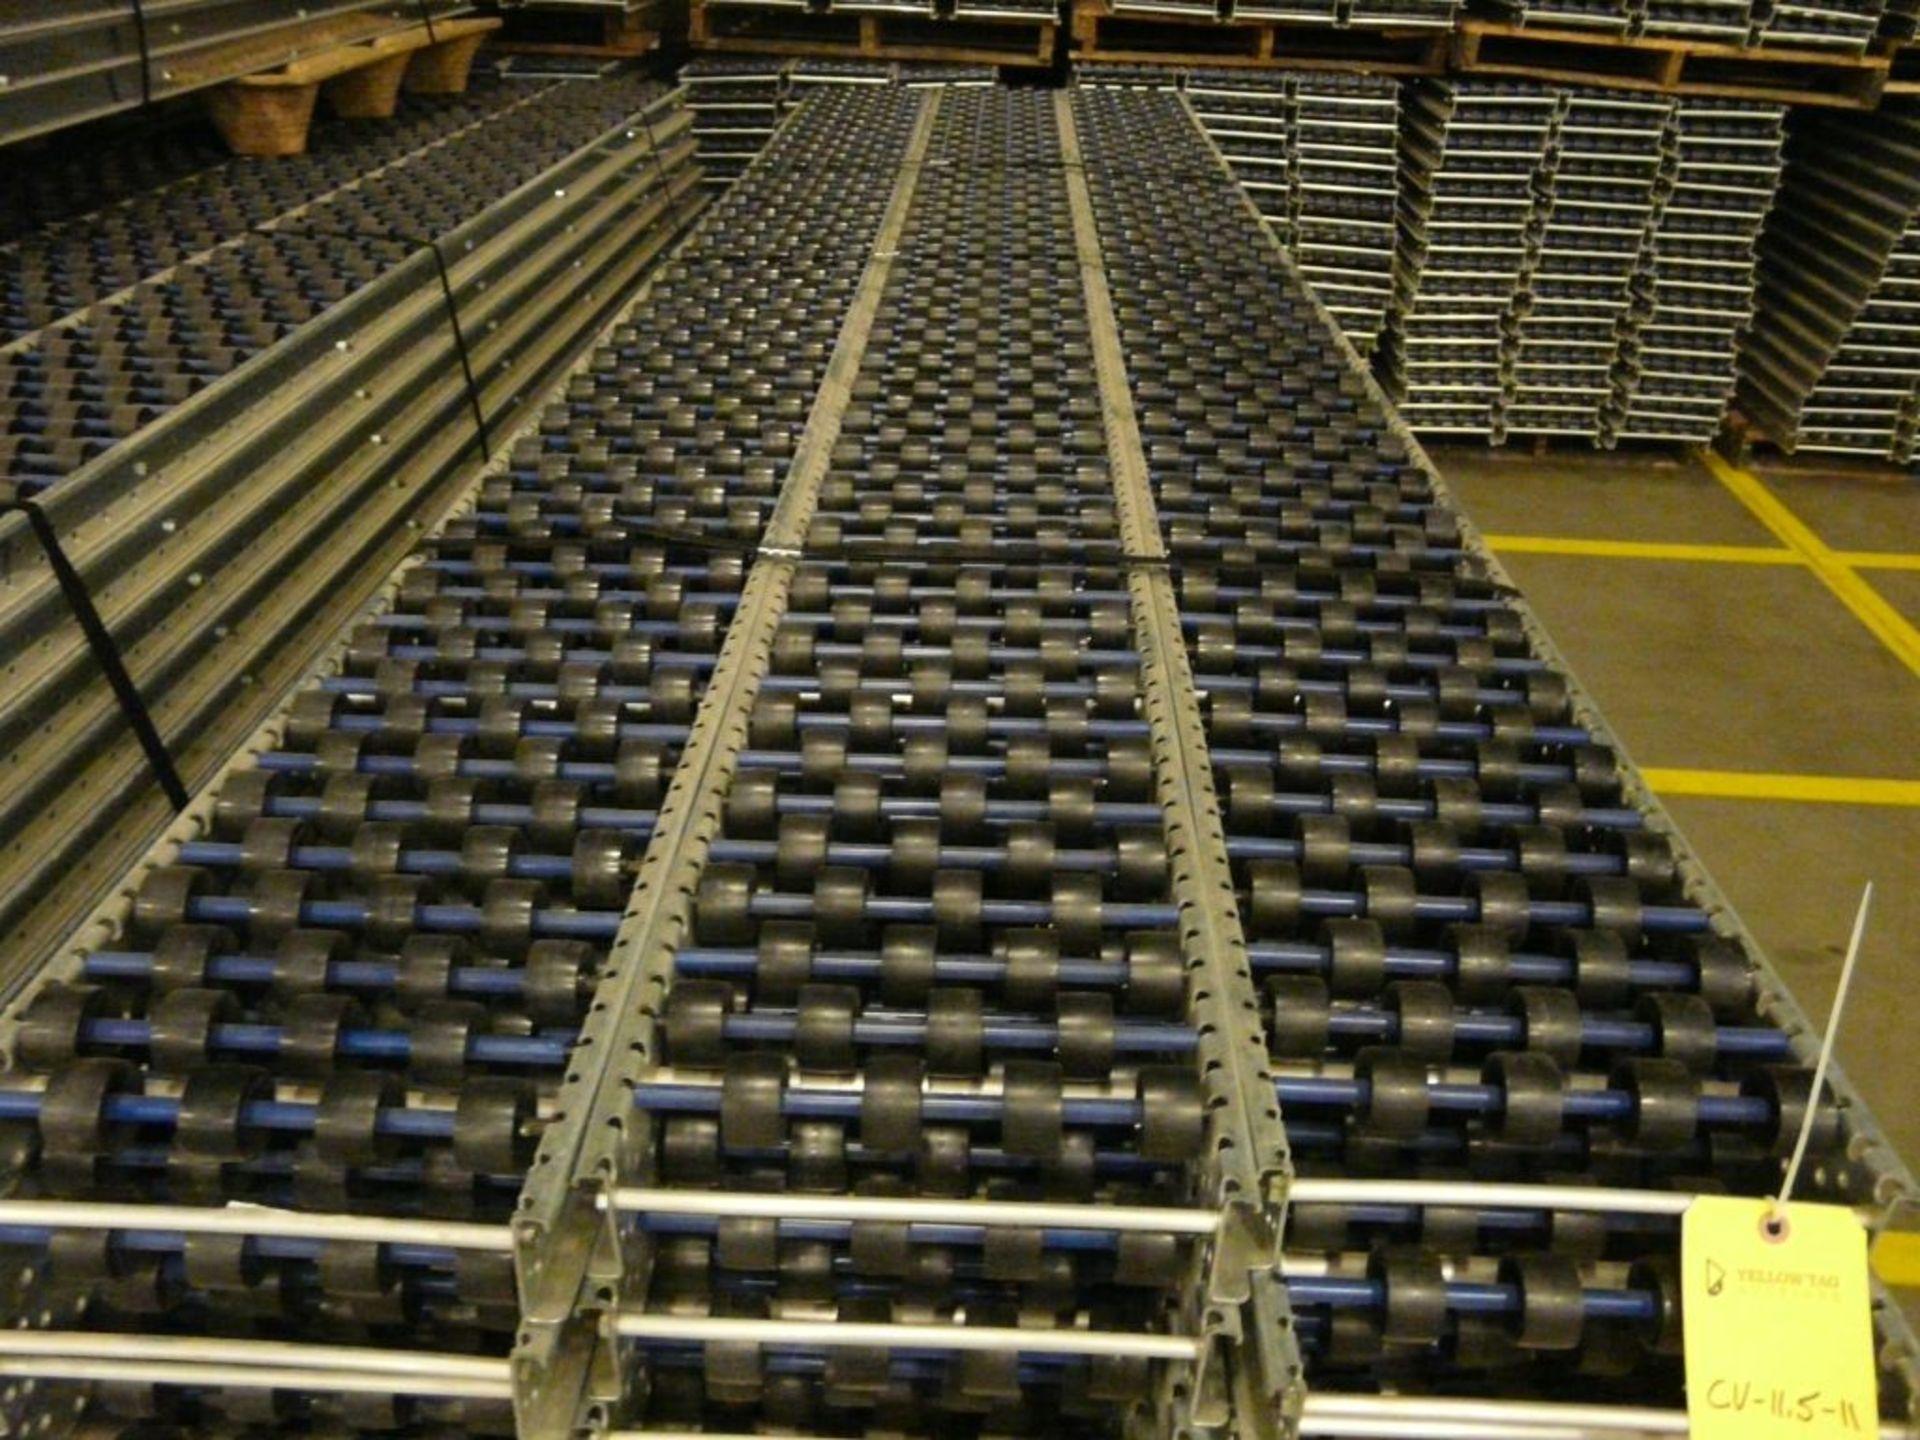 Lot of (90) SpanTrack Wheelbed Carton Flow Conveyors - 11.5'L x 11"W; Tag: 224232 - $30 Lot - Image 3 of 4